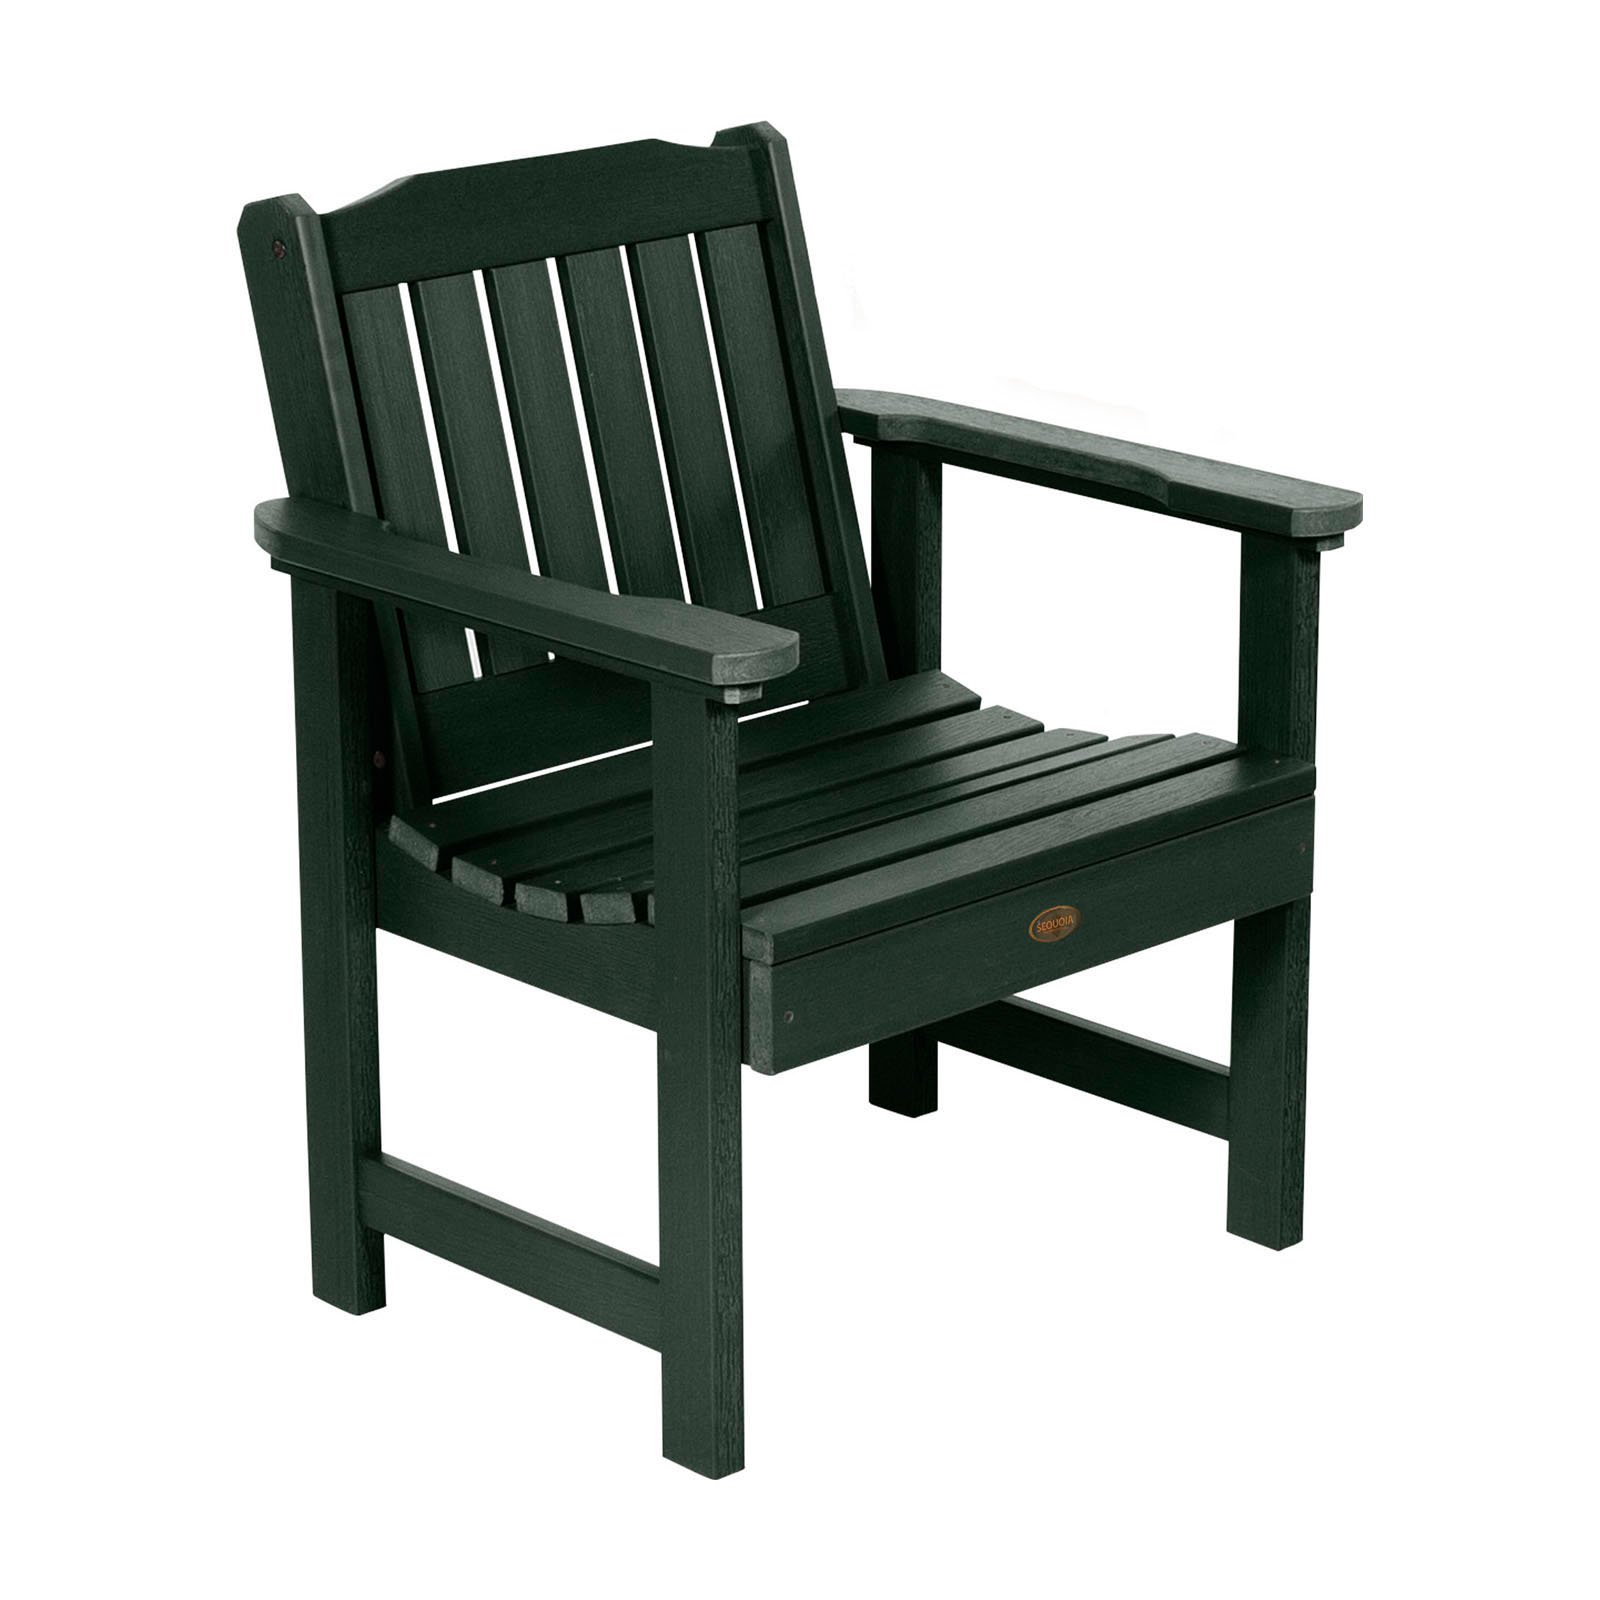 The Sequoia Professional Commercial Grade Springville Lounge Chair - image 1 of 4